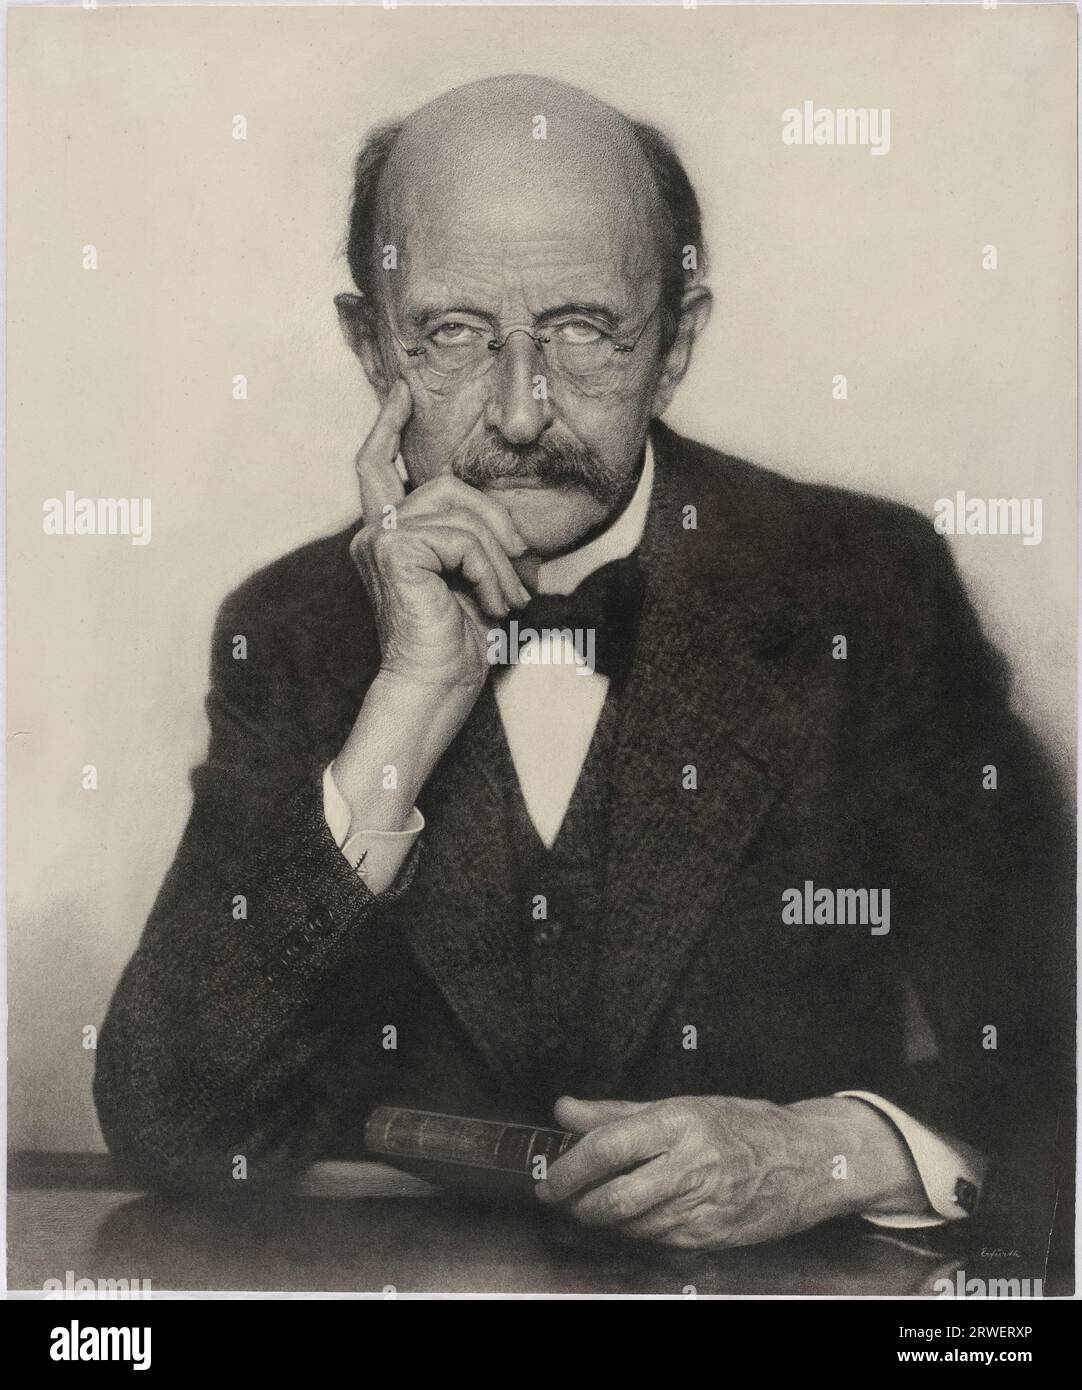 Max Karl Ernst Ludwig Planck (April 23, 1858 - October 4, 1947) was a German physicist in the field of theoretical physics. He is considered the founder of quantum physics, digitally restored reproduction of a public domain photo by Hugo Erfurth. Stock Photo